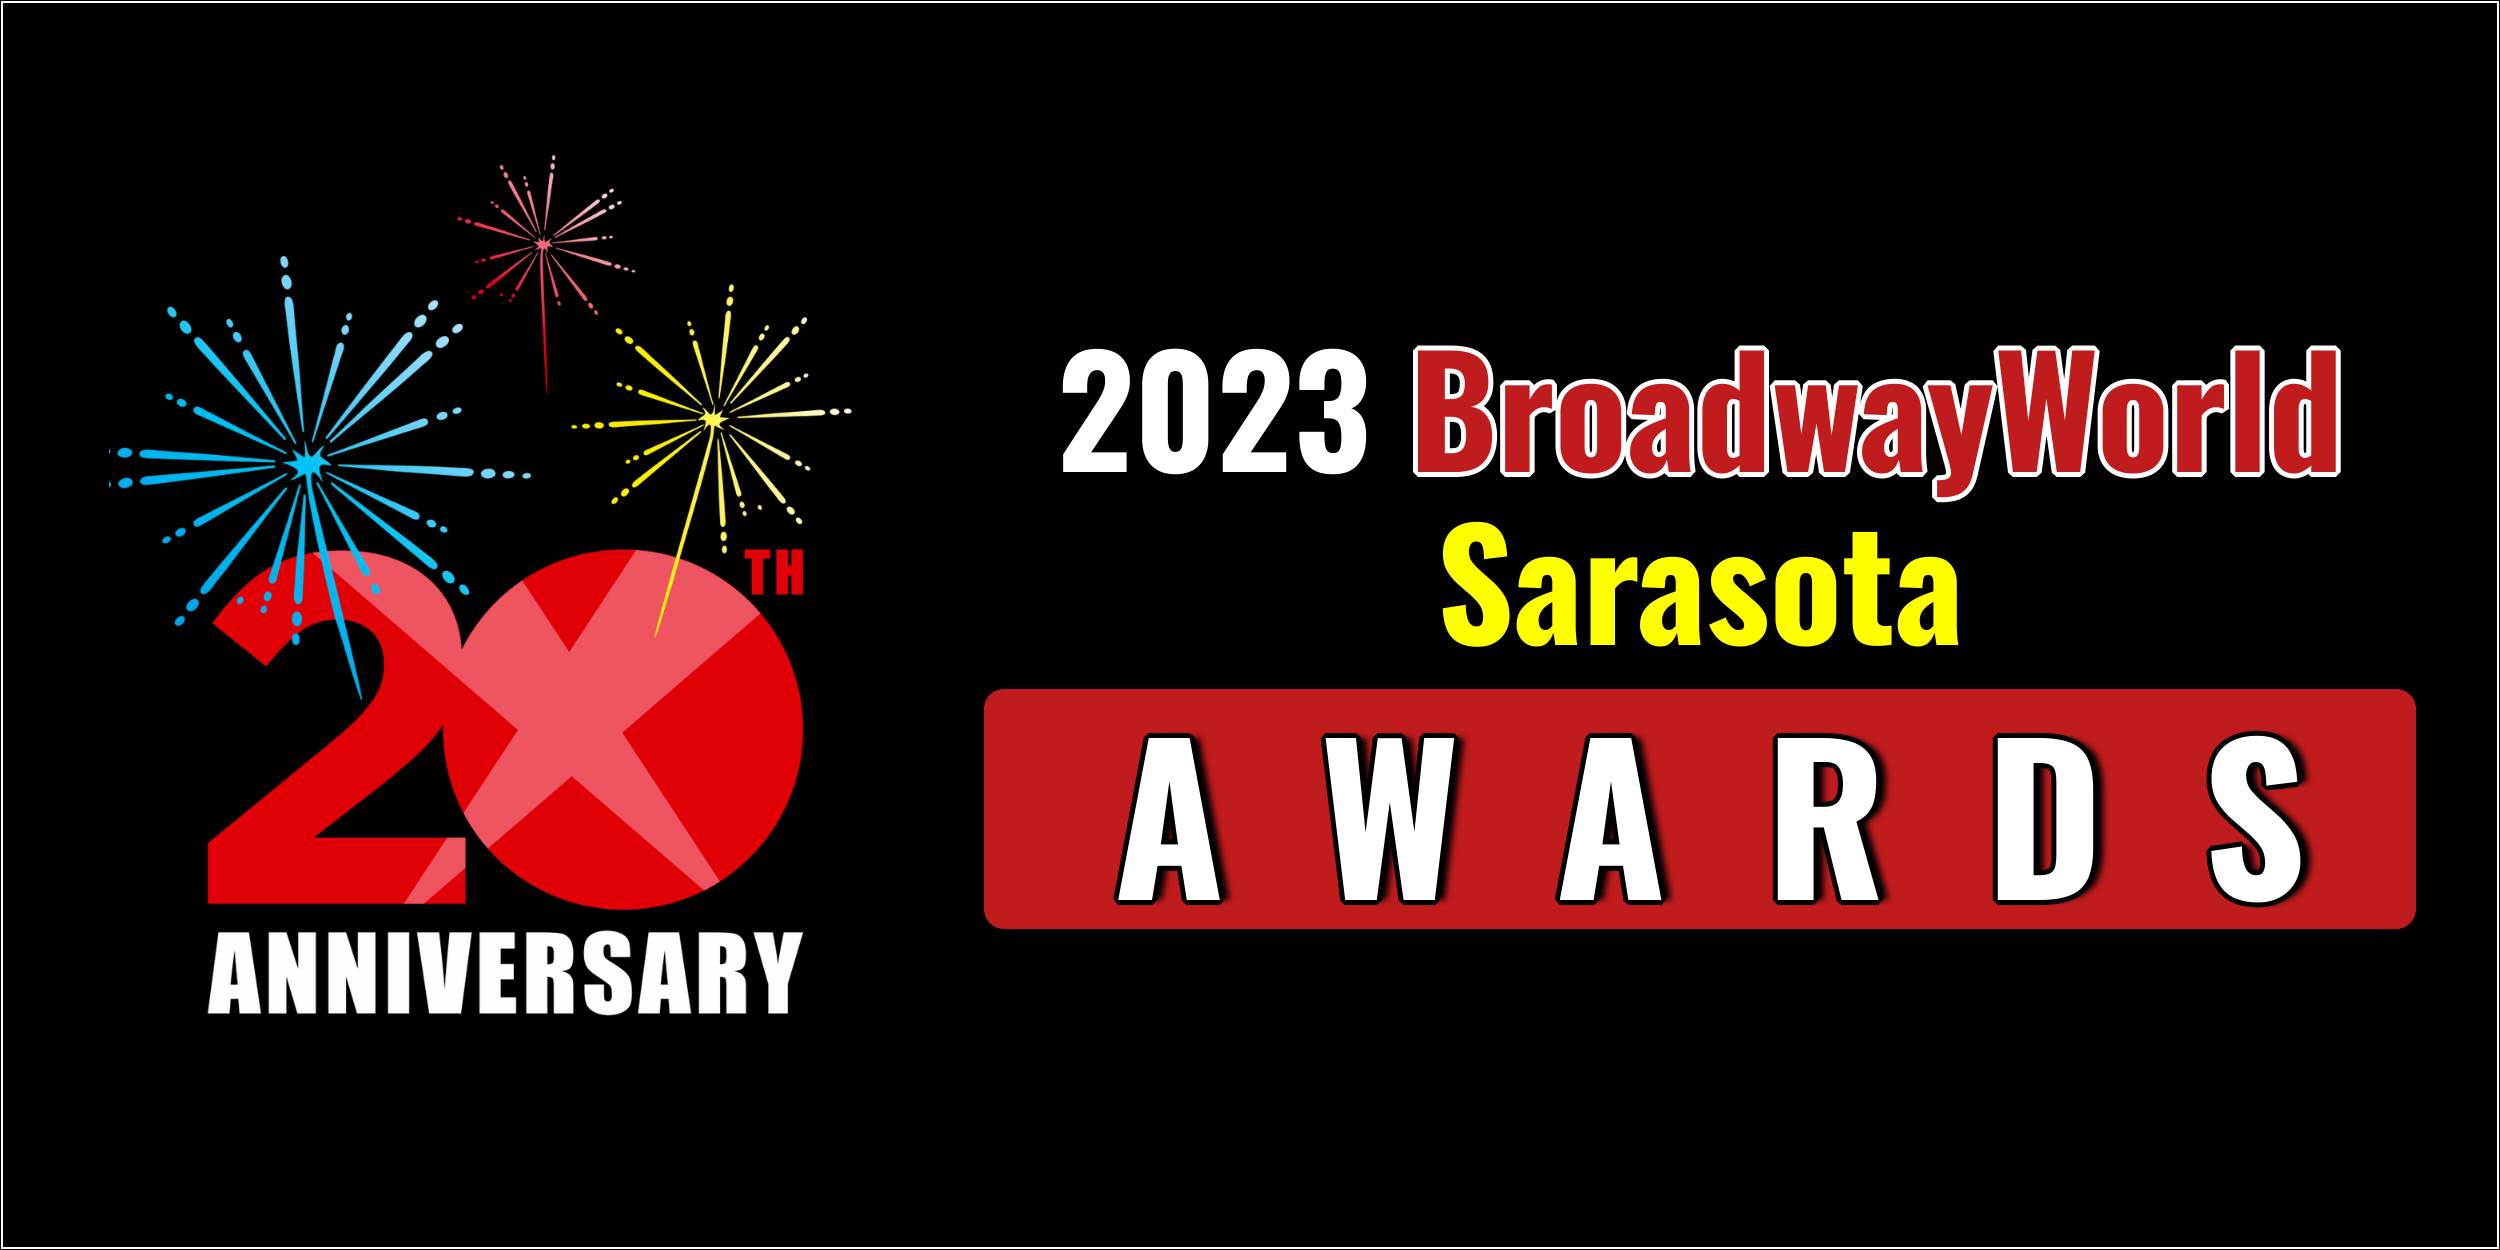 Latest Standings Announced For The 2023 BroadwayWorld Sarasota Awards; RIDE THE CYCLONE Le Photo